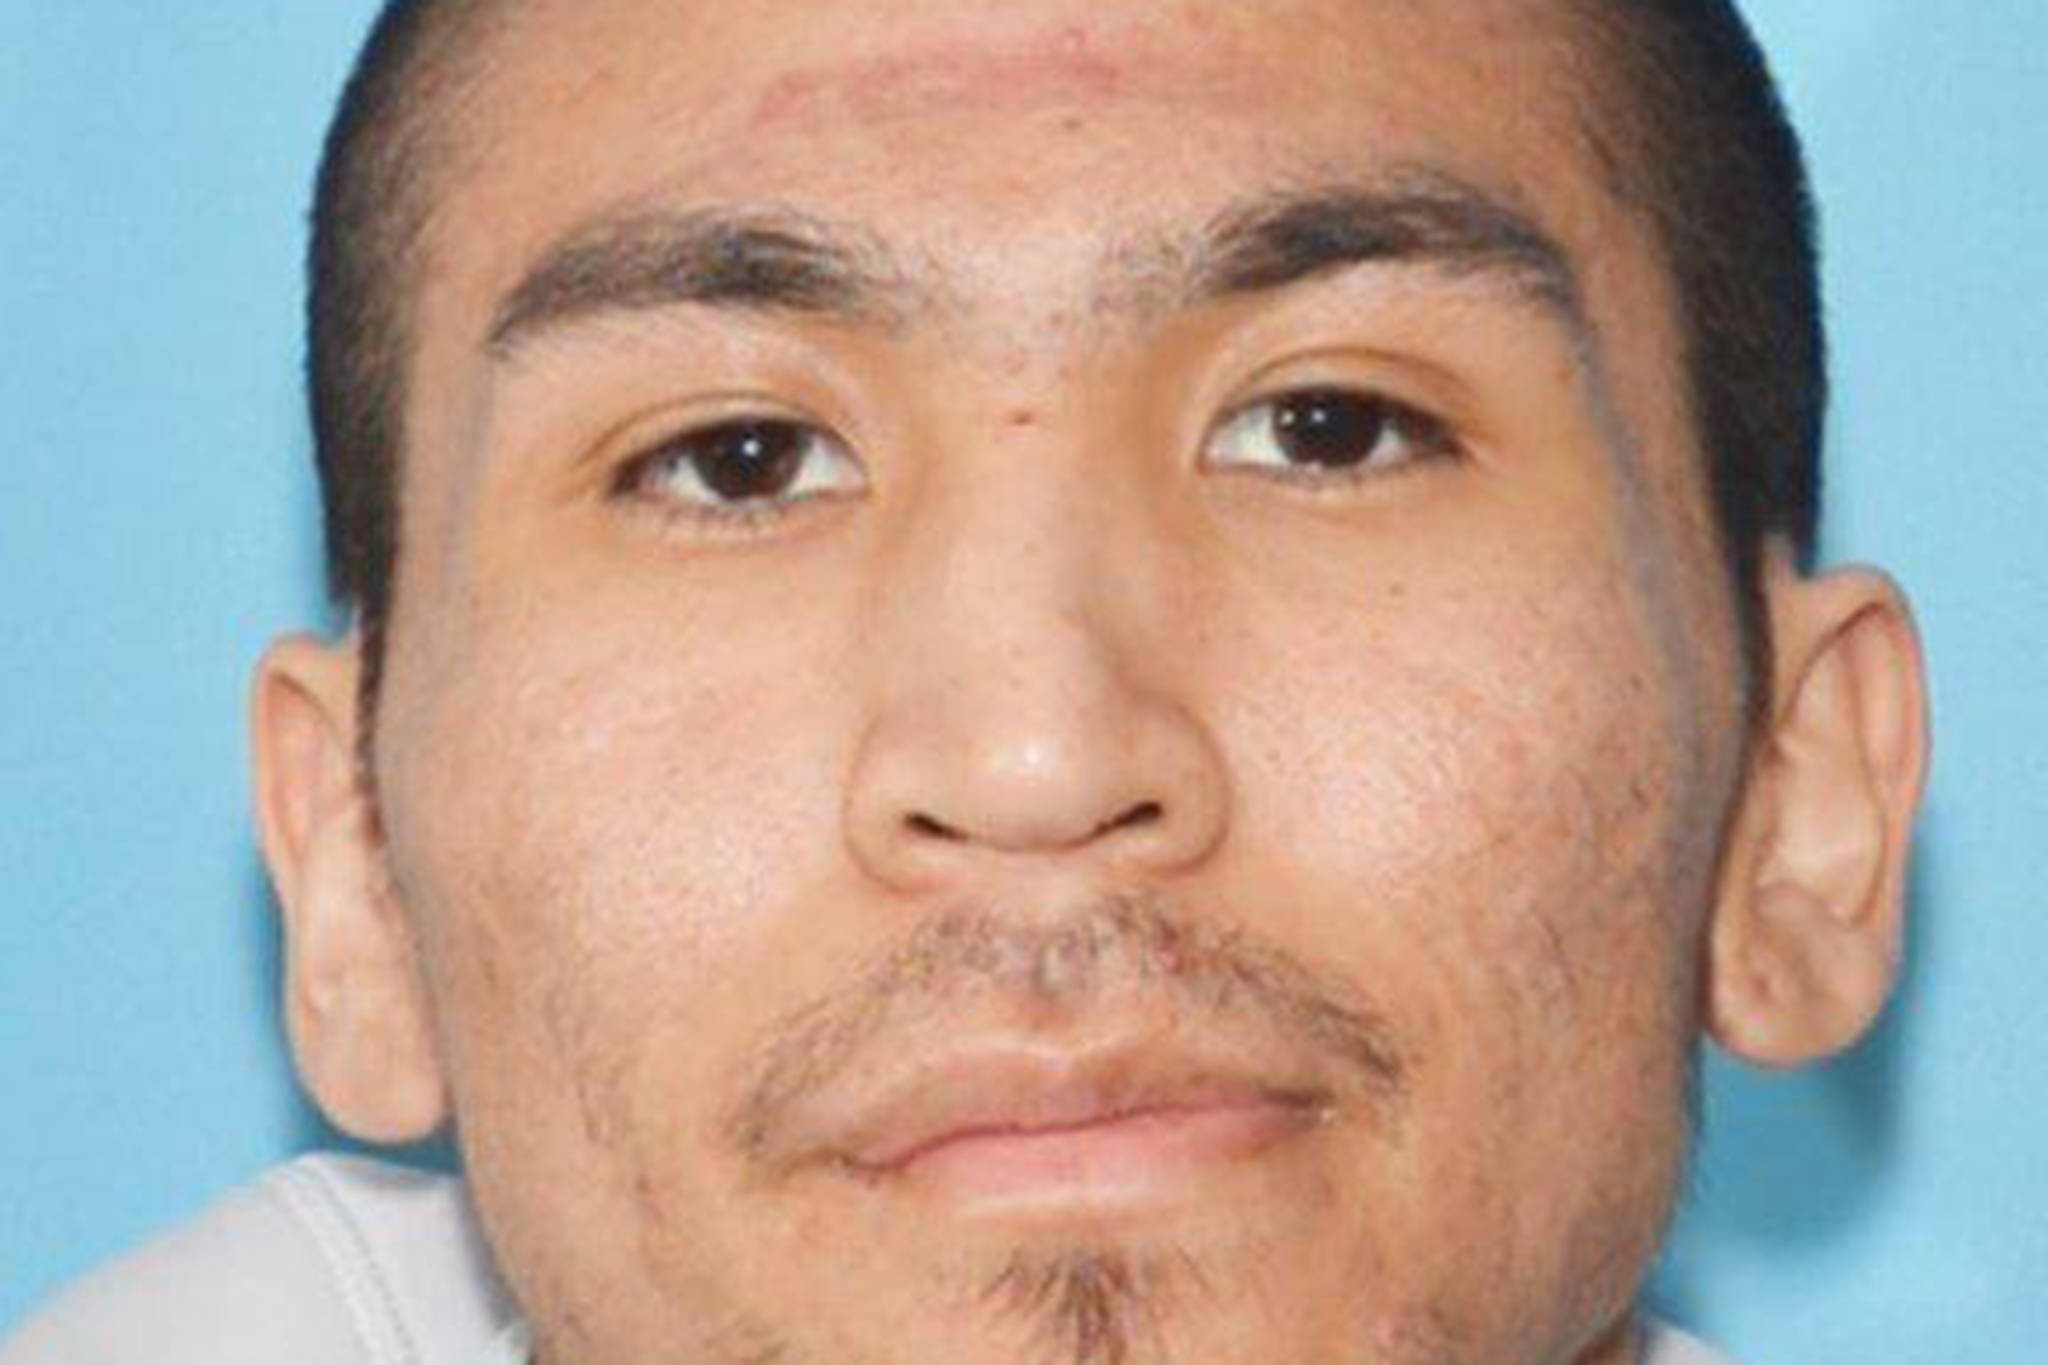 Jordan Irving Parker Oldham, 26, has two warrants out for his arrest, according to a Juneau Police Department Press release. (Courtesy Photo | Juneau Police Department)